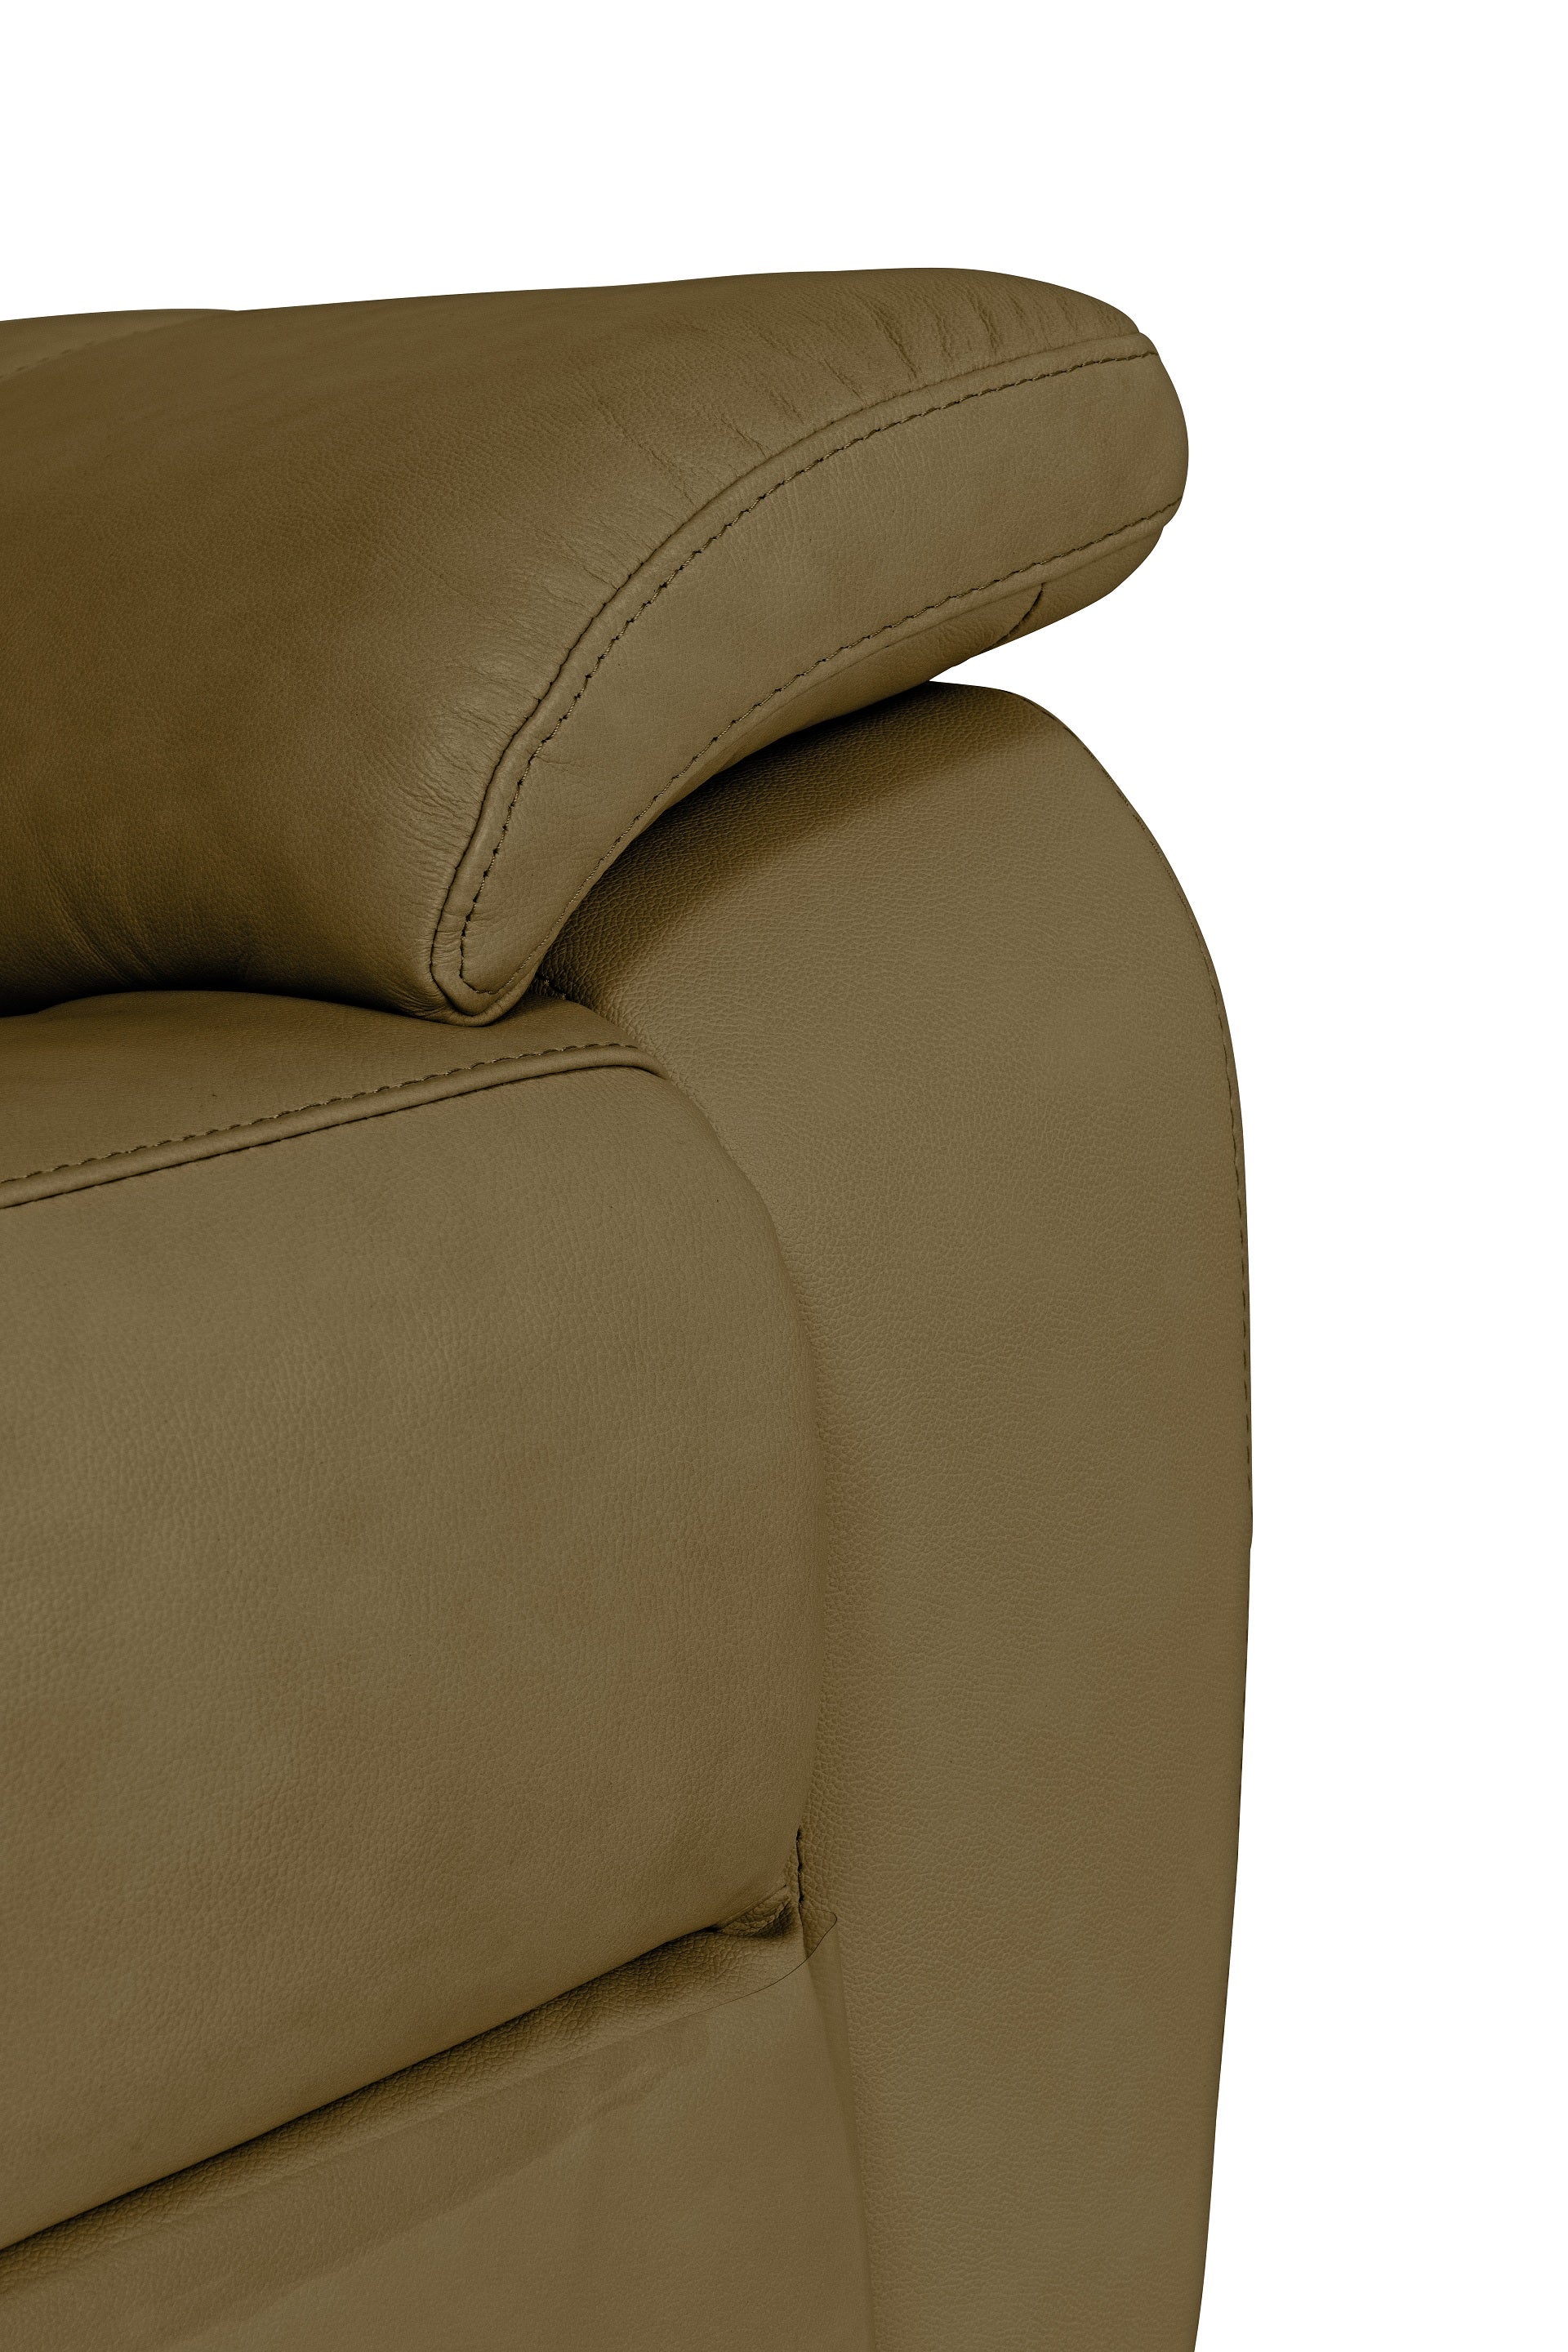 Sonia Leather Electric 2 Seater Recliner - Brown